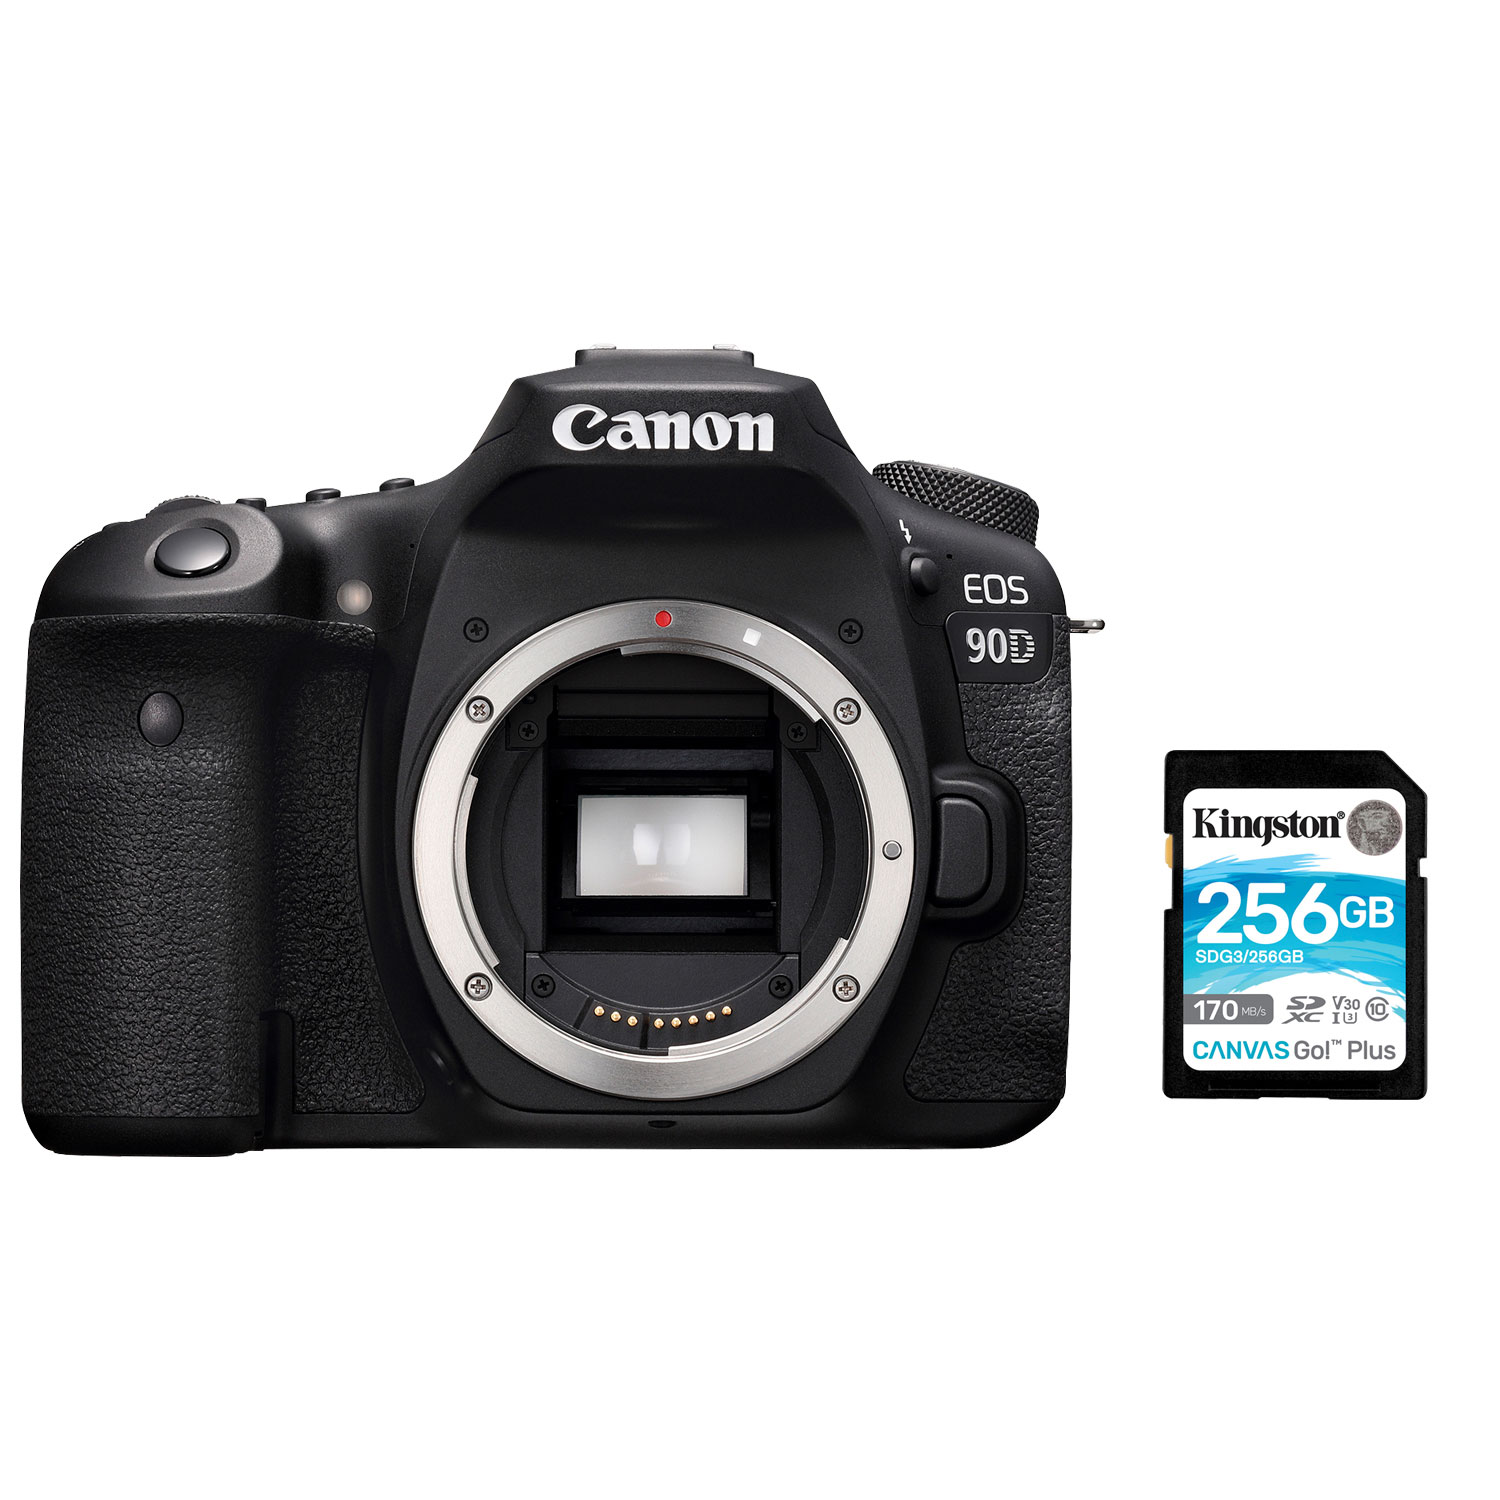 Canon EOS 90D DSLR Camera (Body Only) with 256GB Memory Card